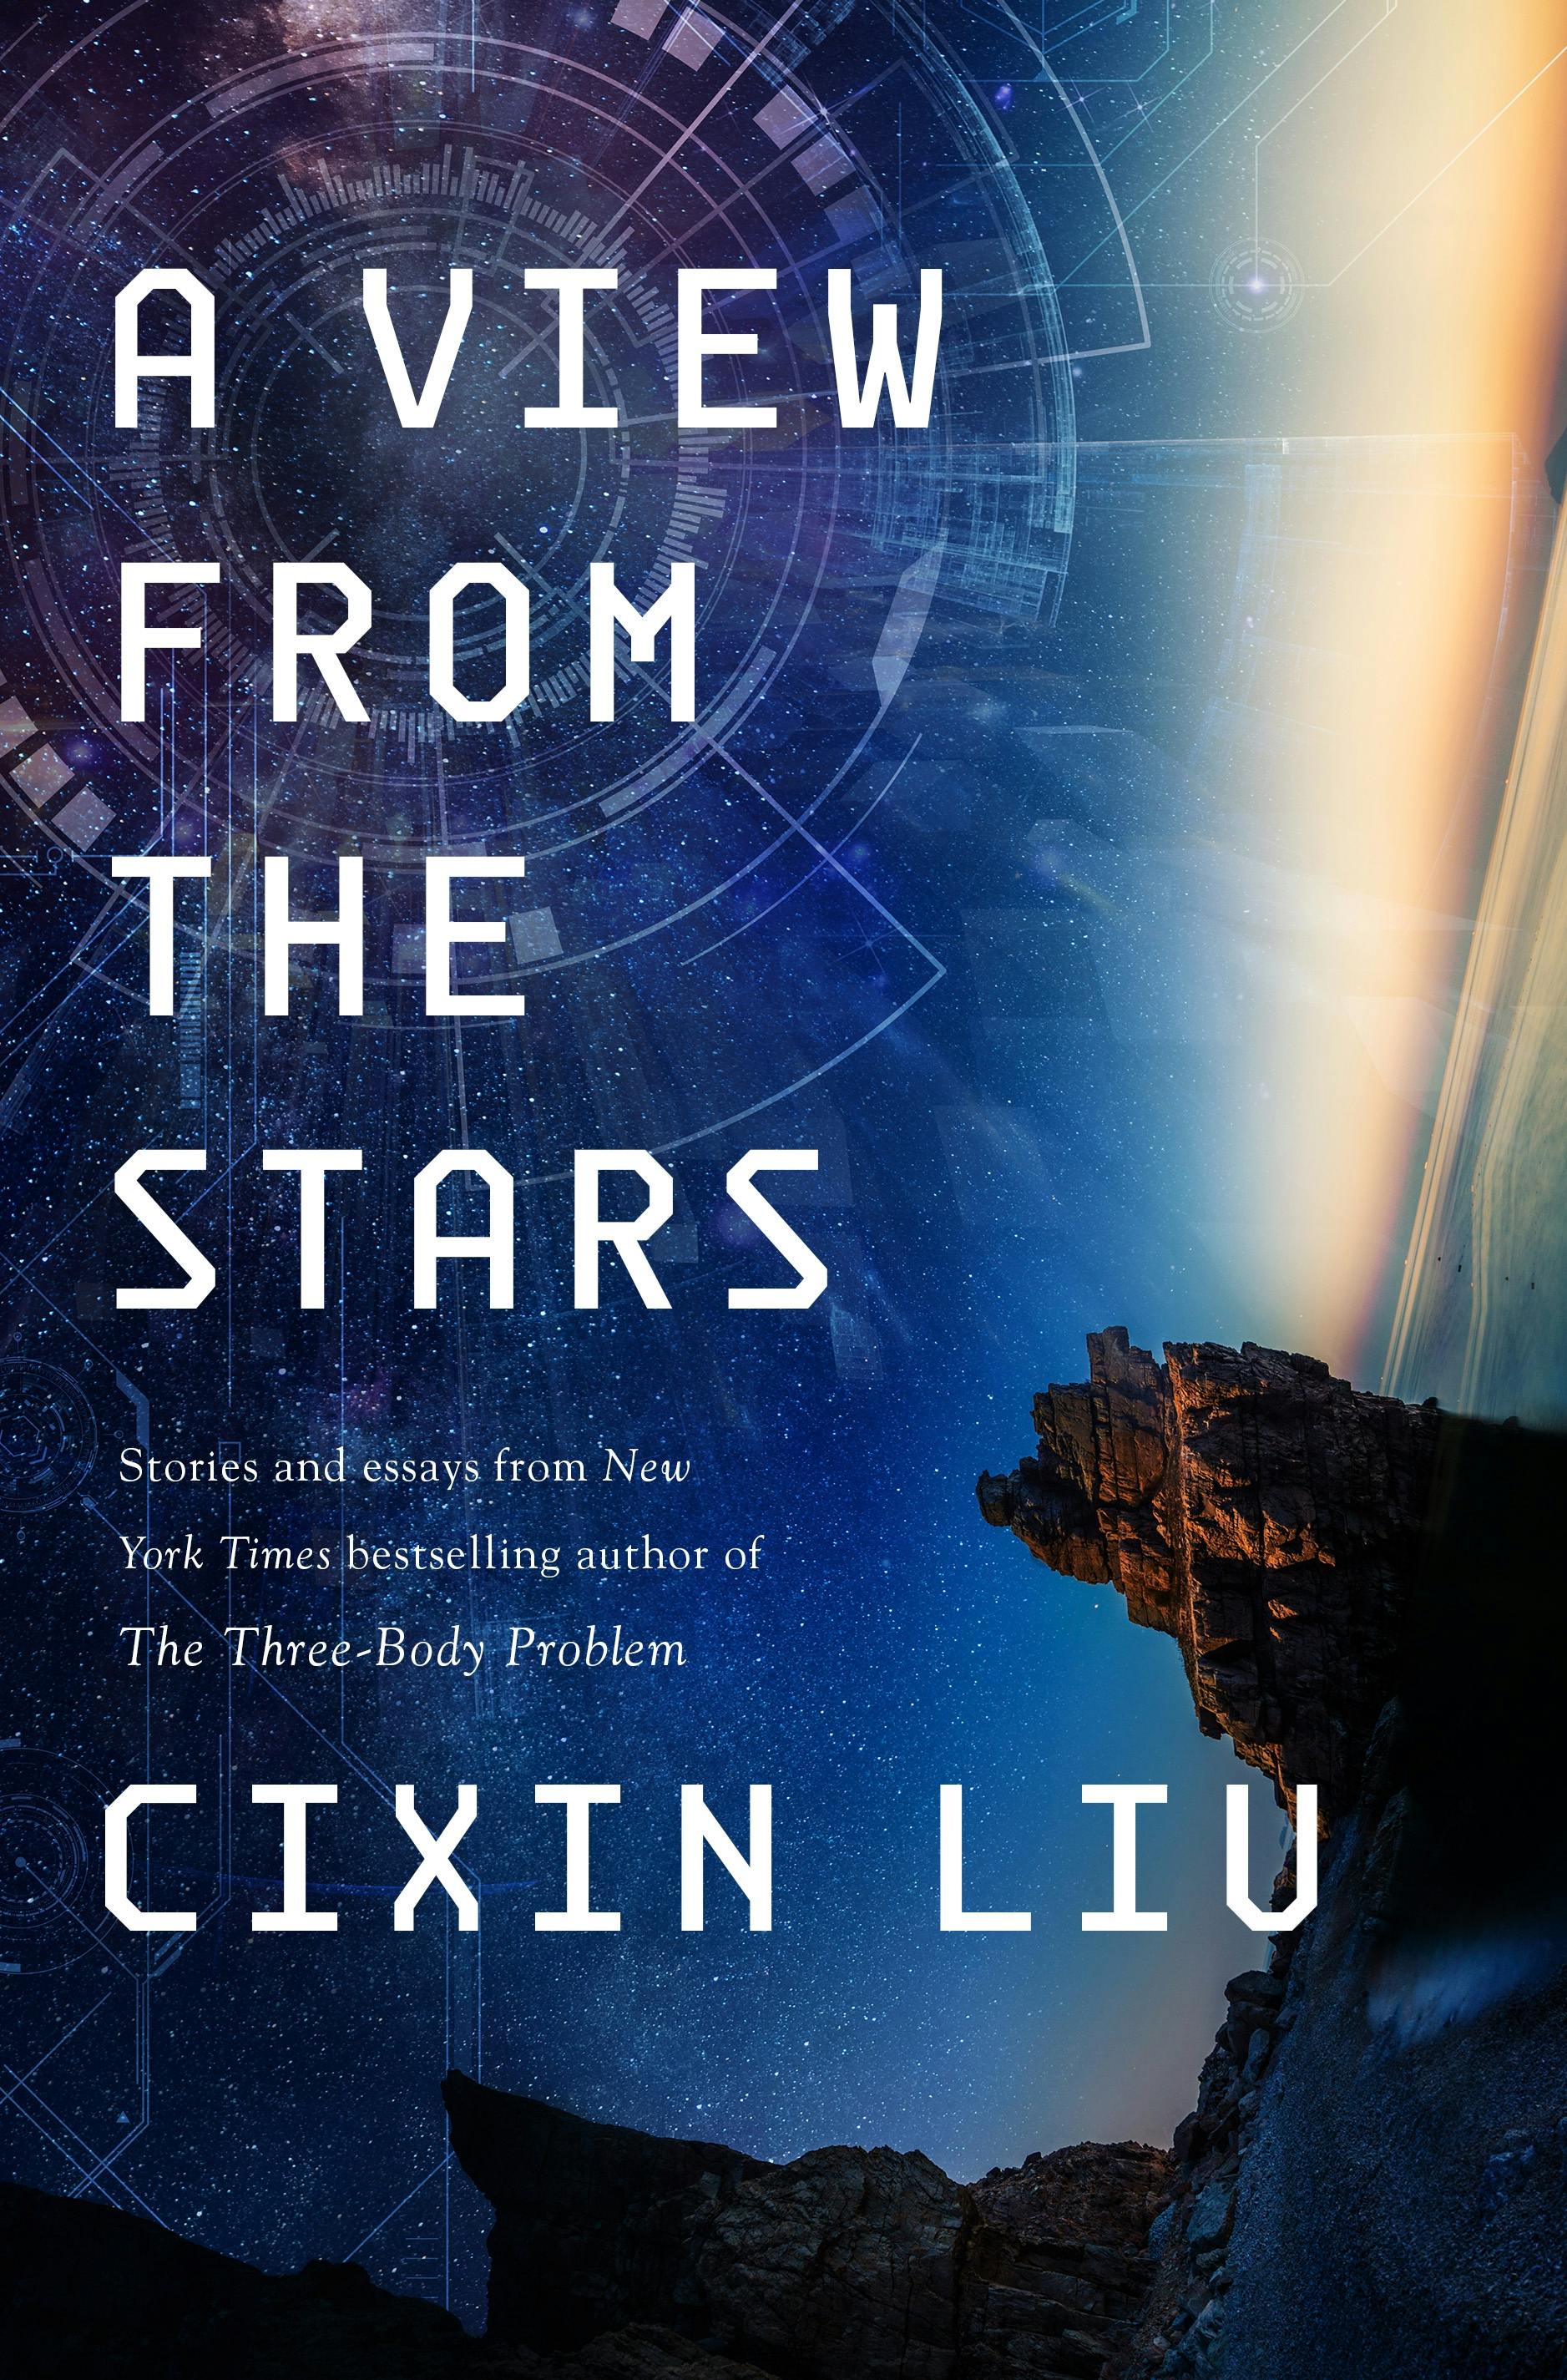 Cover for the book titled as: A View from the Stars